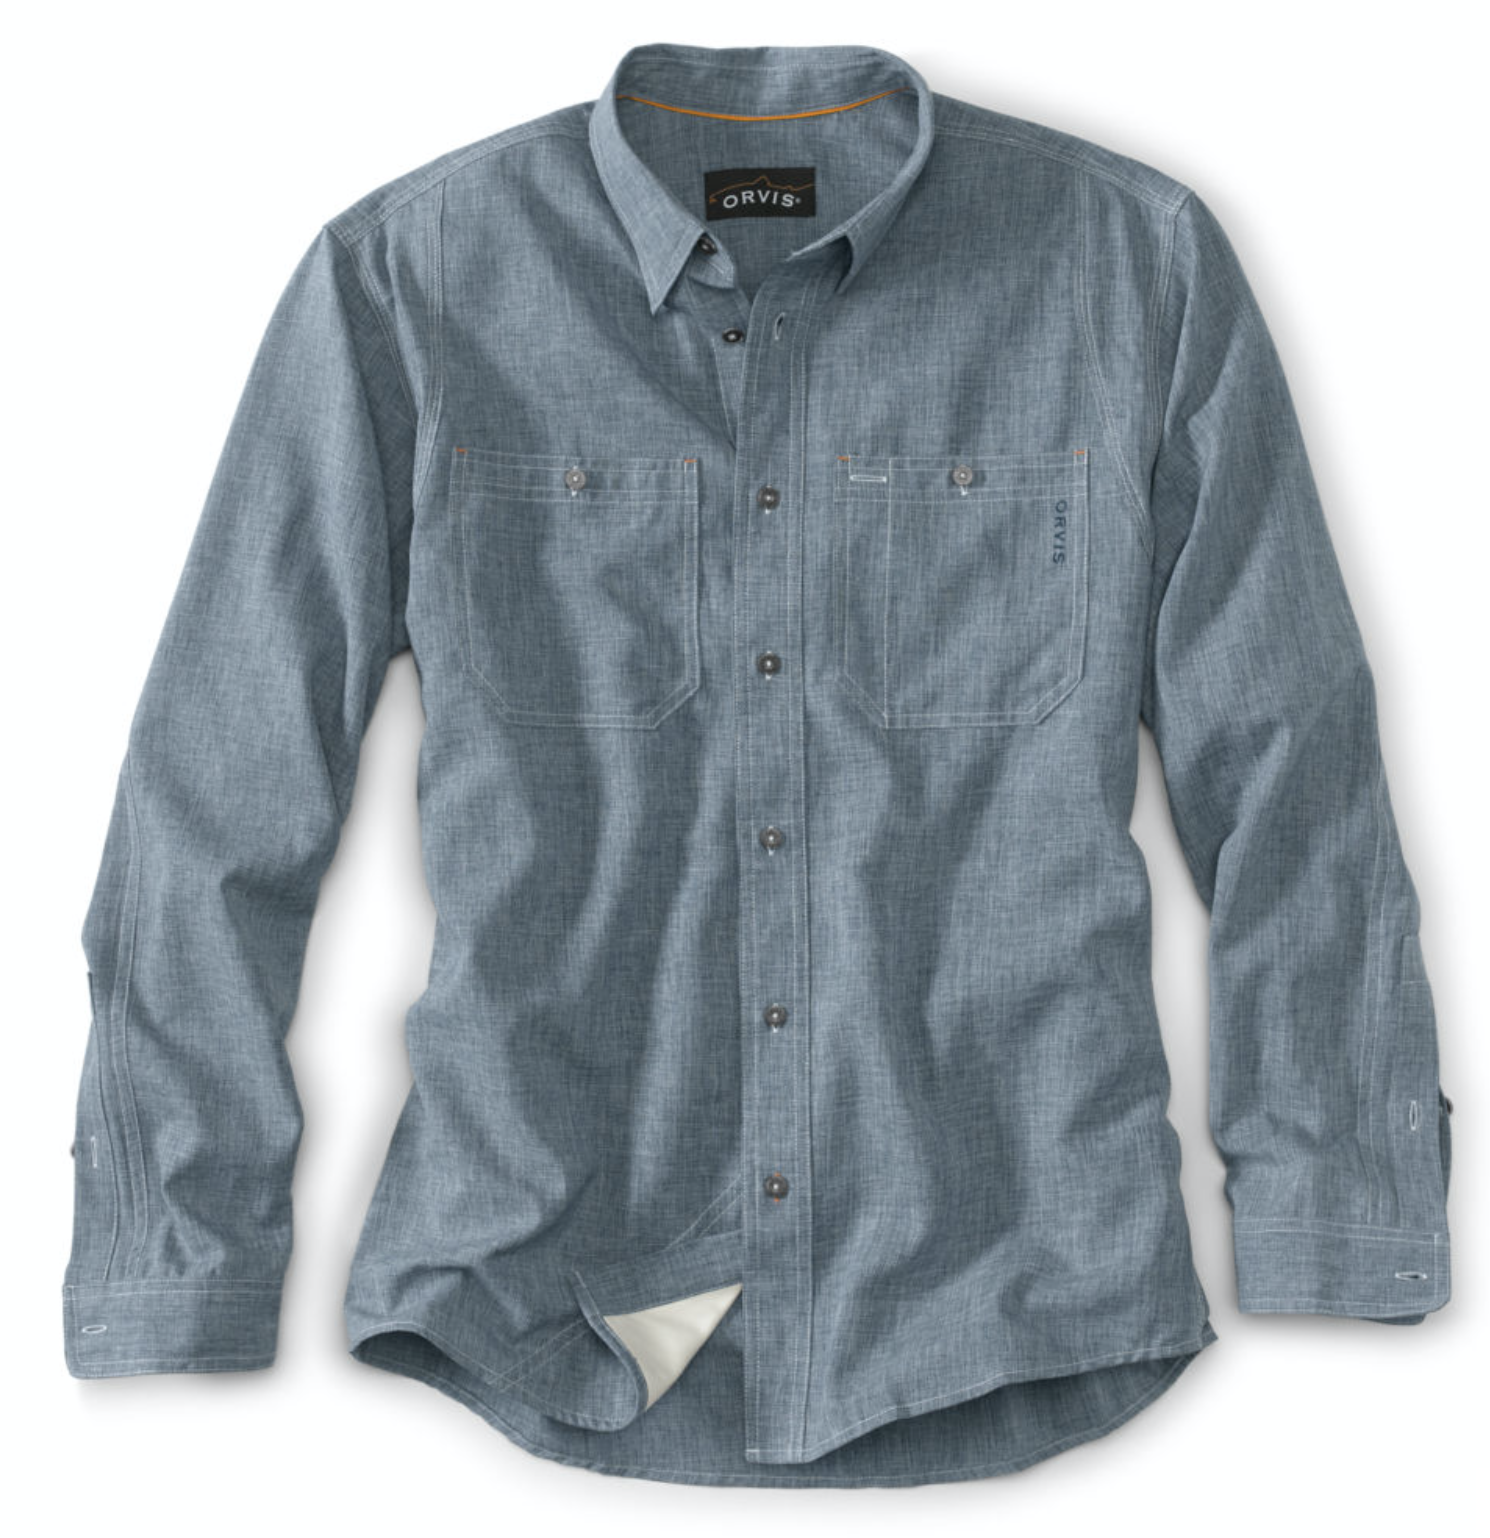  Orvis Tech Chambray Long Sleeve Men's Work Shirts - Lightweight  Quick-Drying UPF 40 Chambray Fabric Casual Men's Shirts, Blue Chambray - S  : Clothing, Shoes & Jewelry